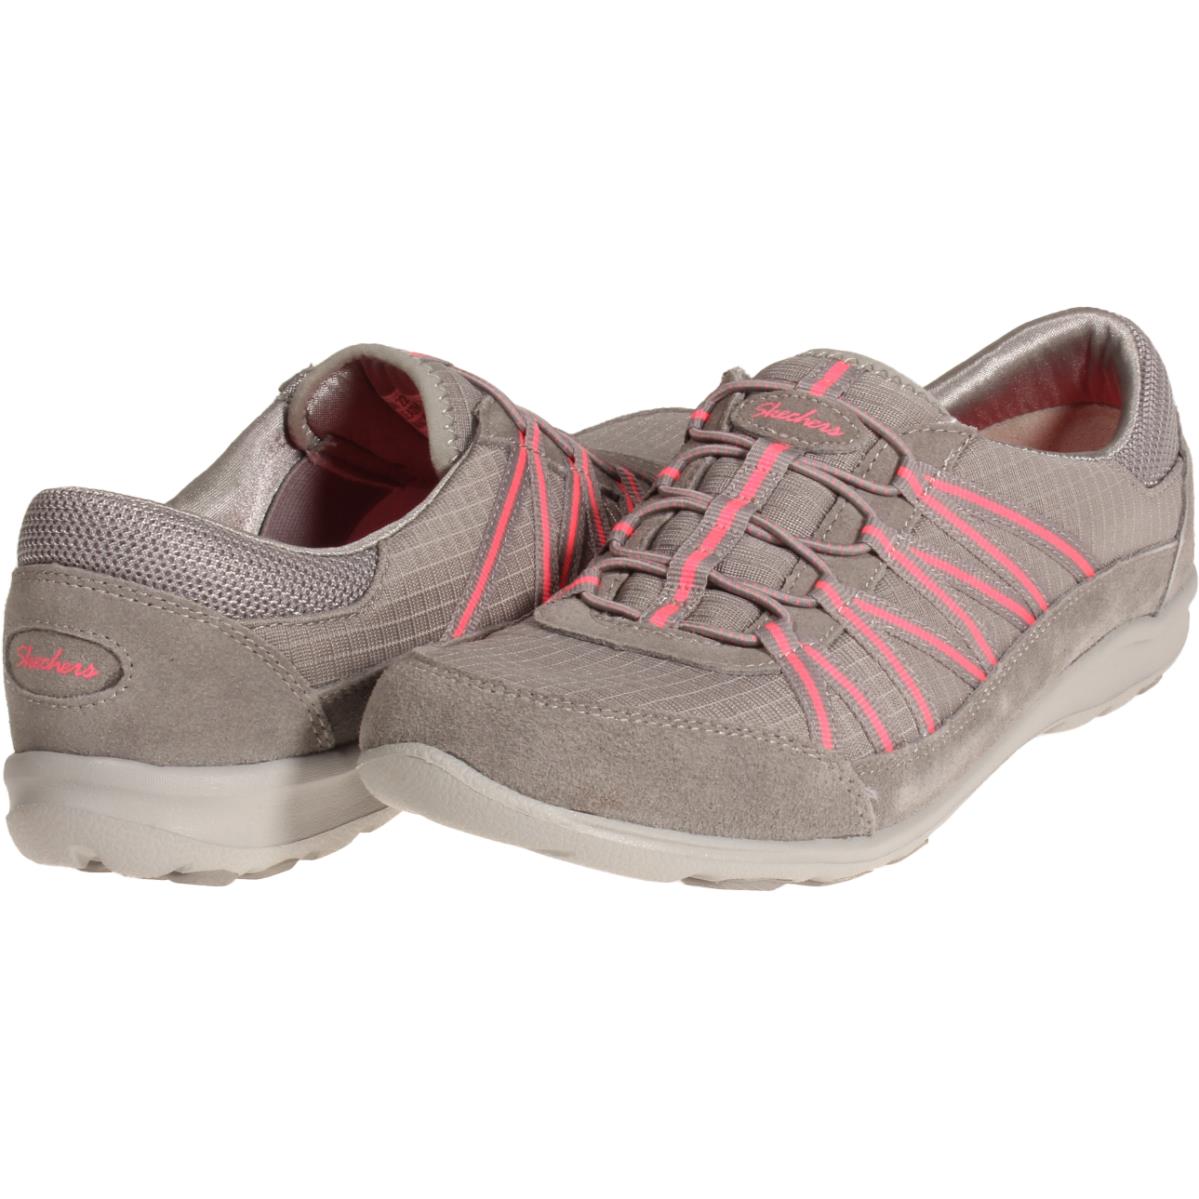 Skechers Relaxed Fit Dreamchaser - Romantic Trail Womens Sneaker Gray Size 9